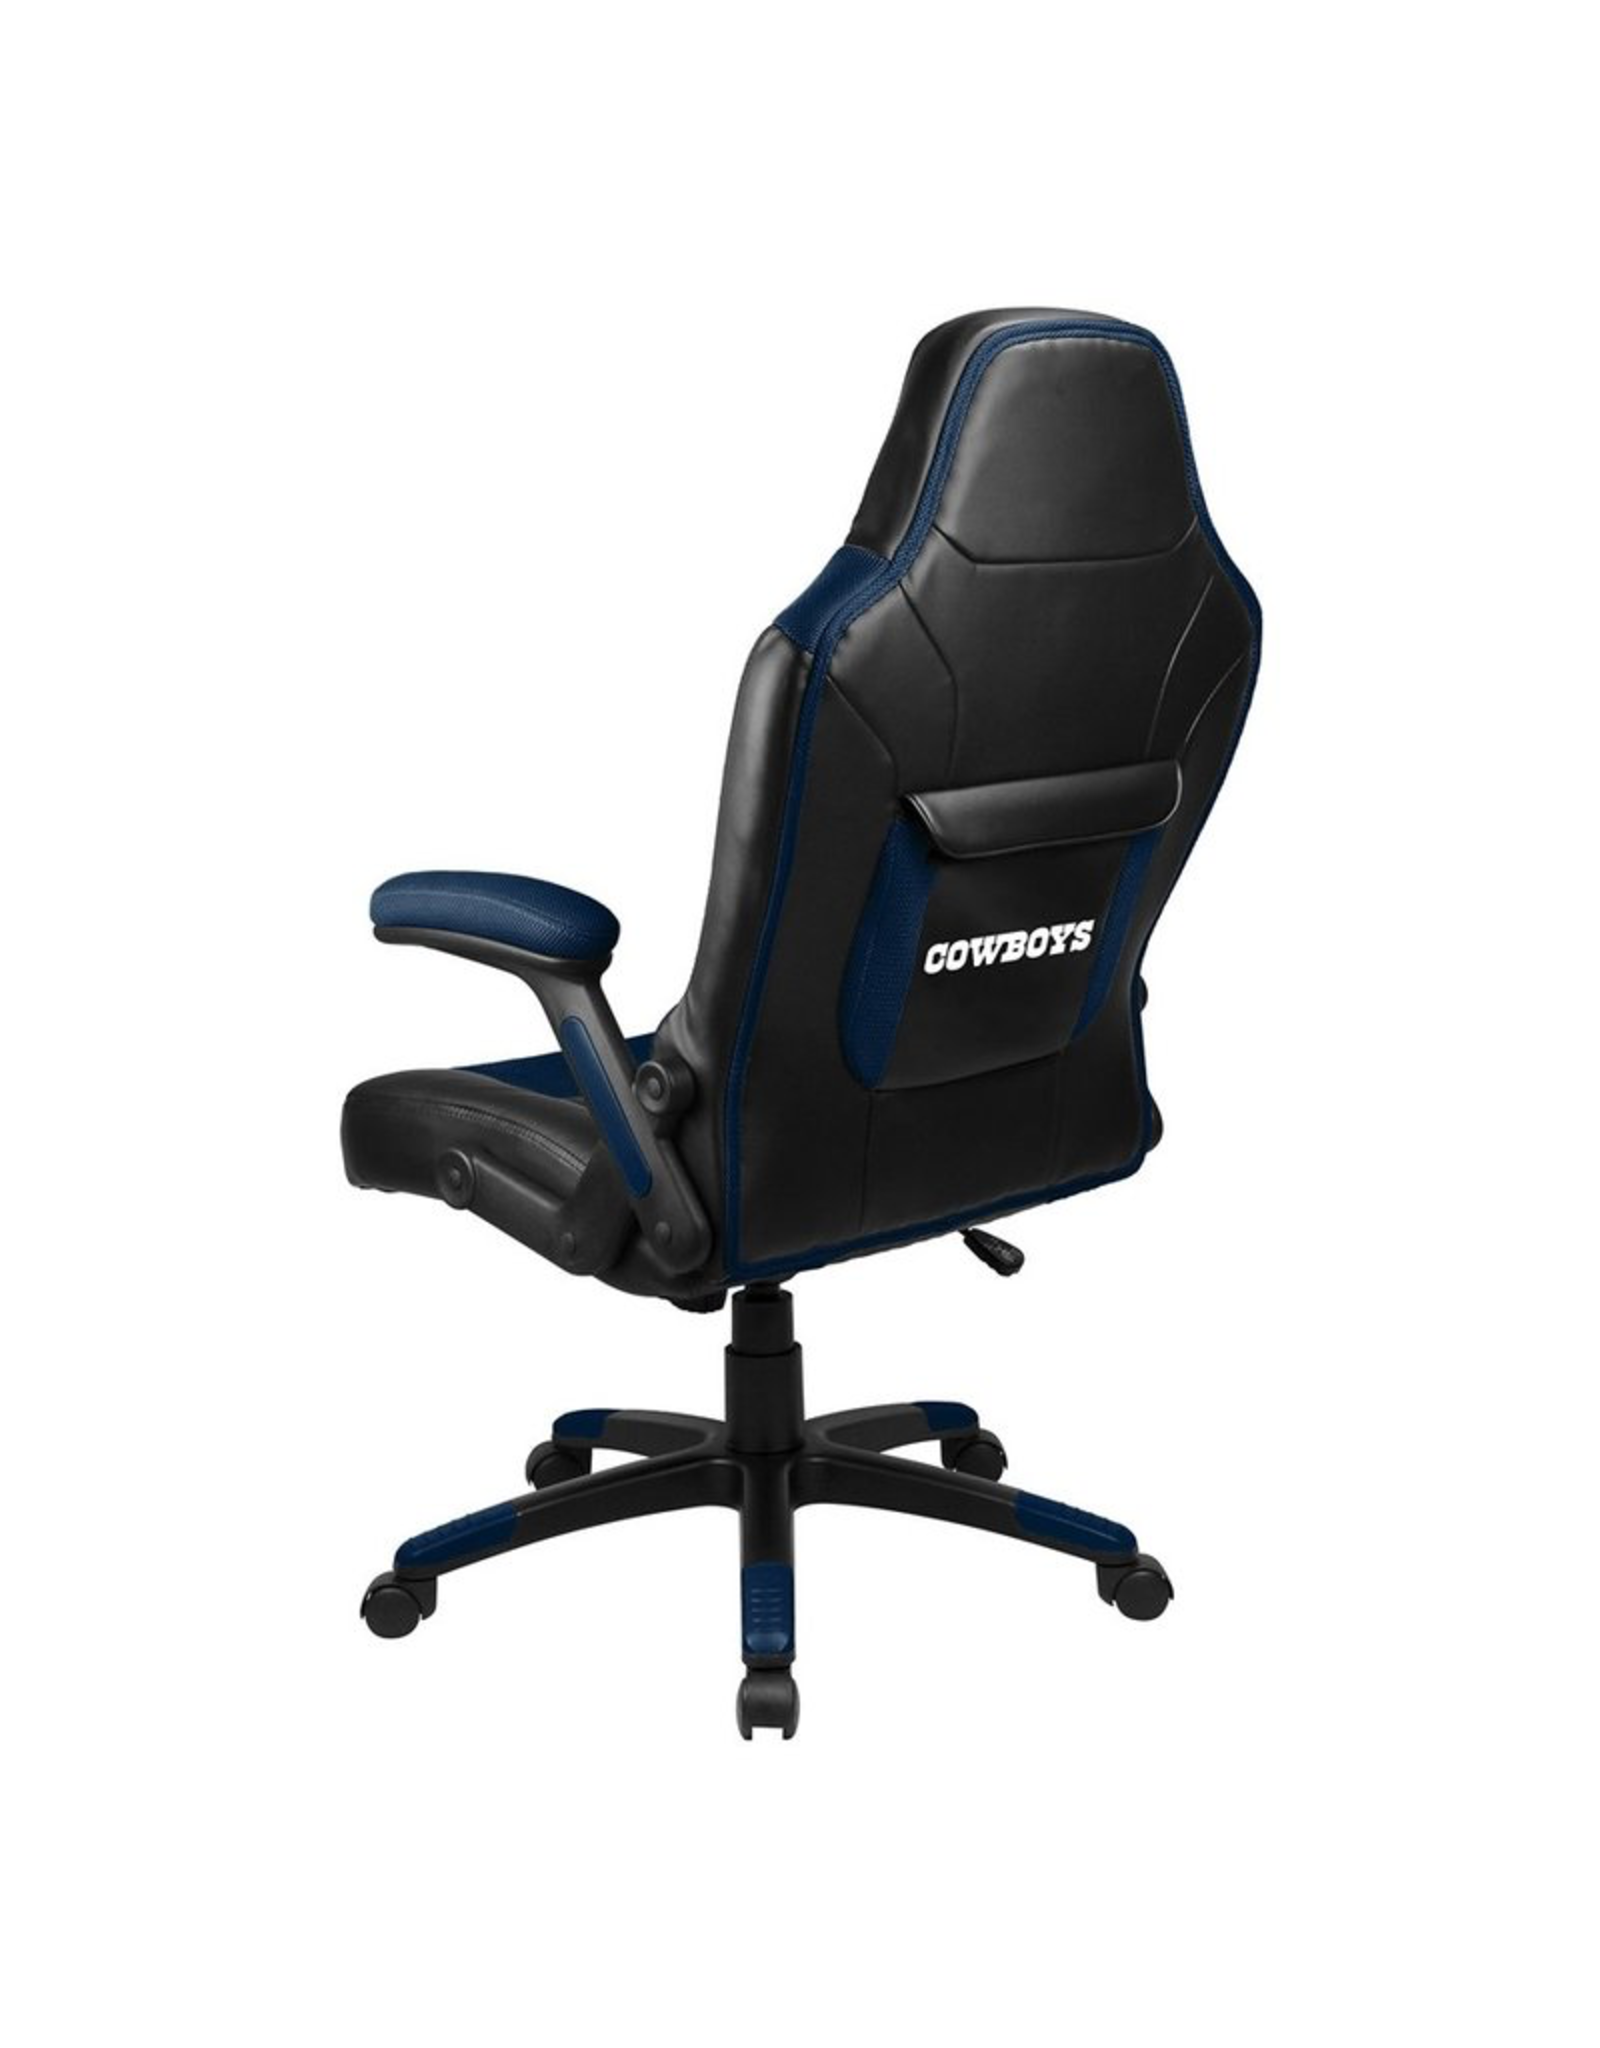 Imperial Dallas Cowboys Gaming / Office Chair